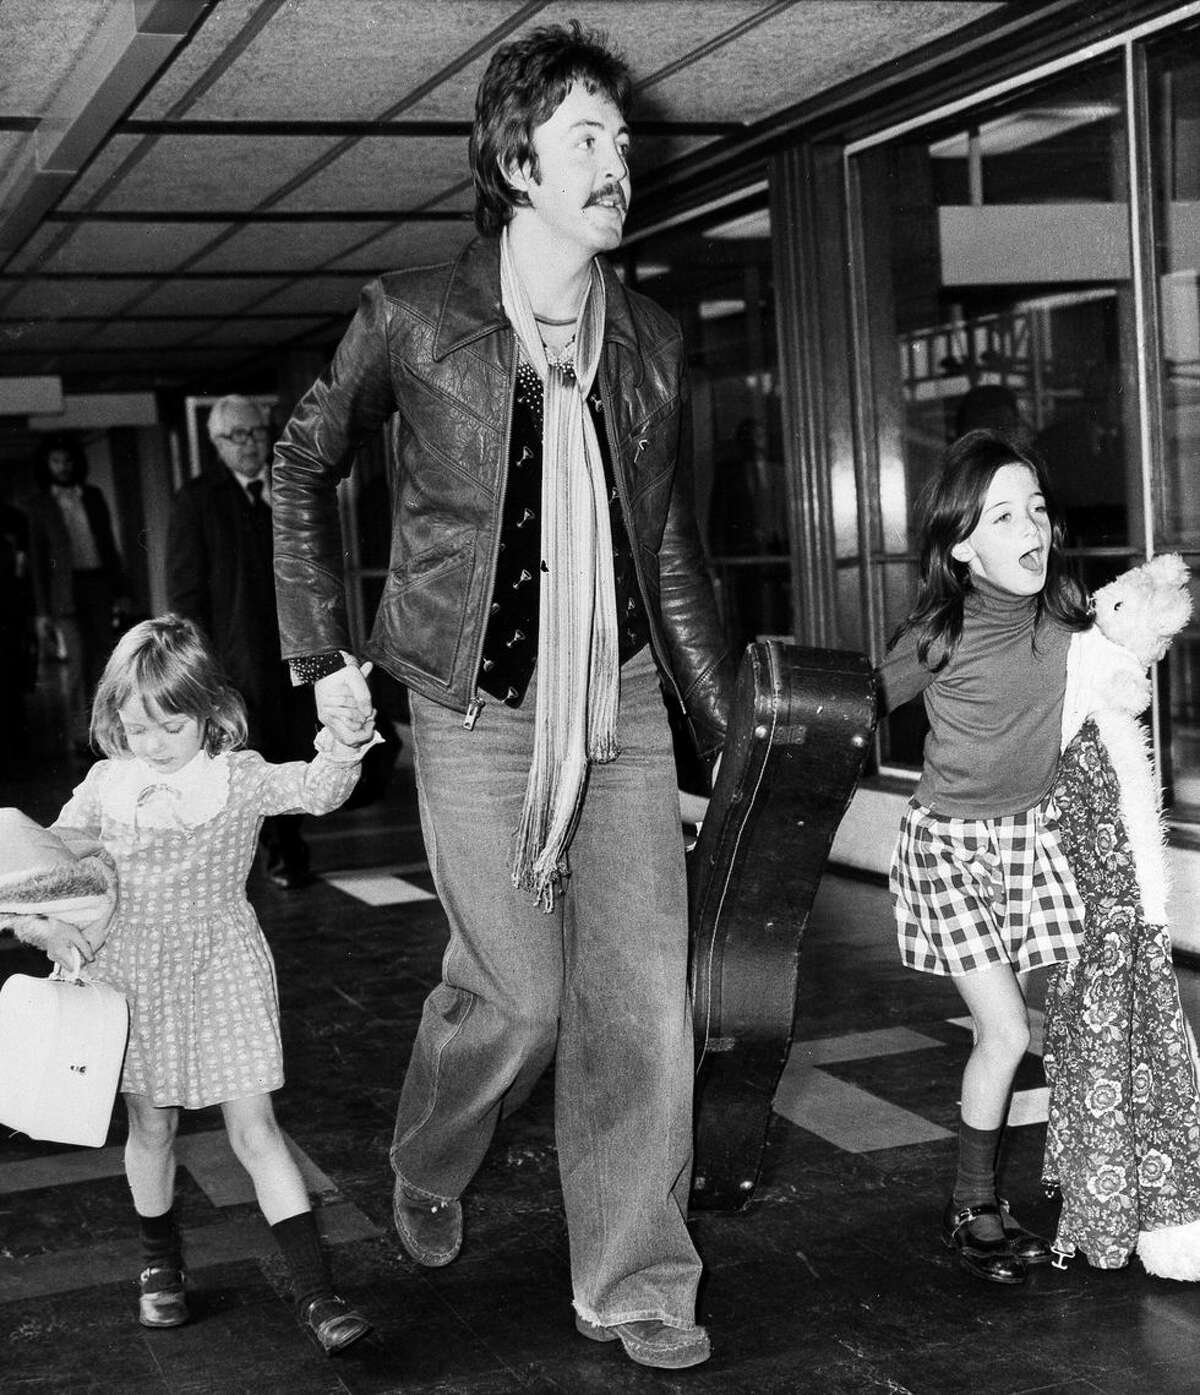 Vintage photos of celebrities looking glamorous at the airport